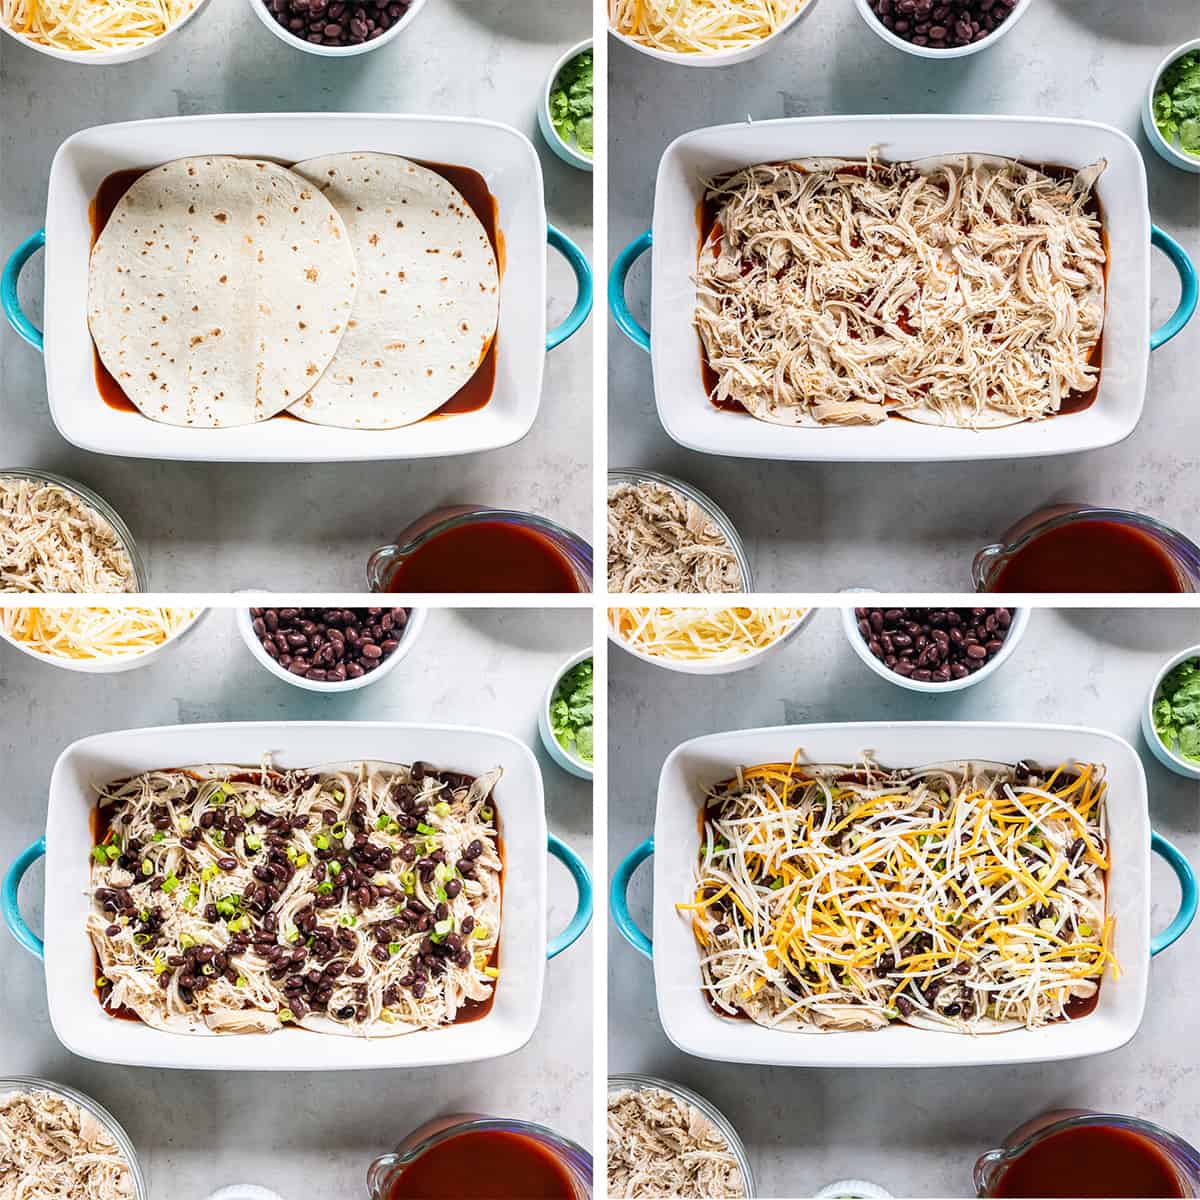 Four images of tortillas, enchilada sauce, chicken, cheese, and beans being layered in a baking dish.